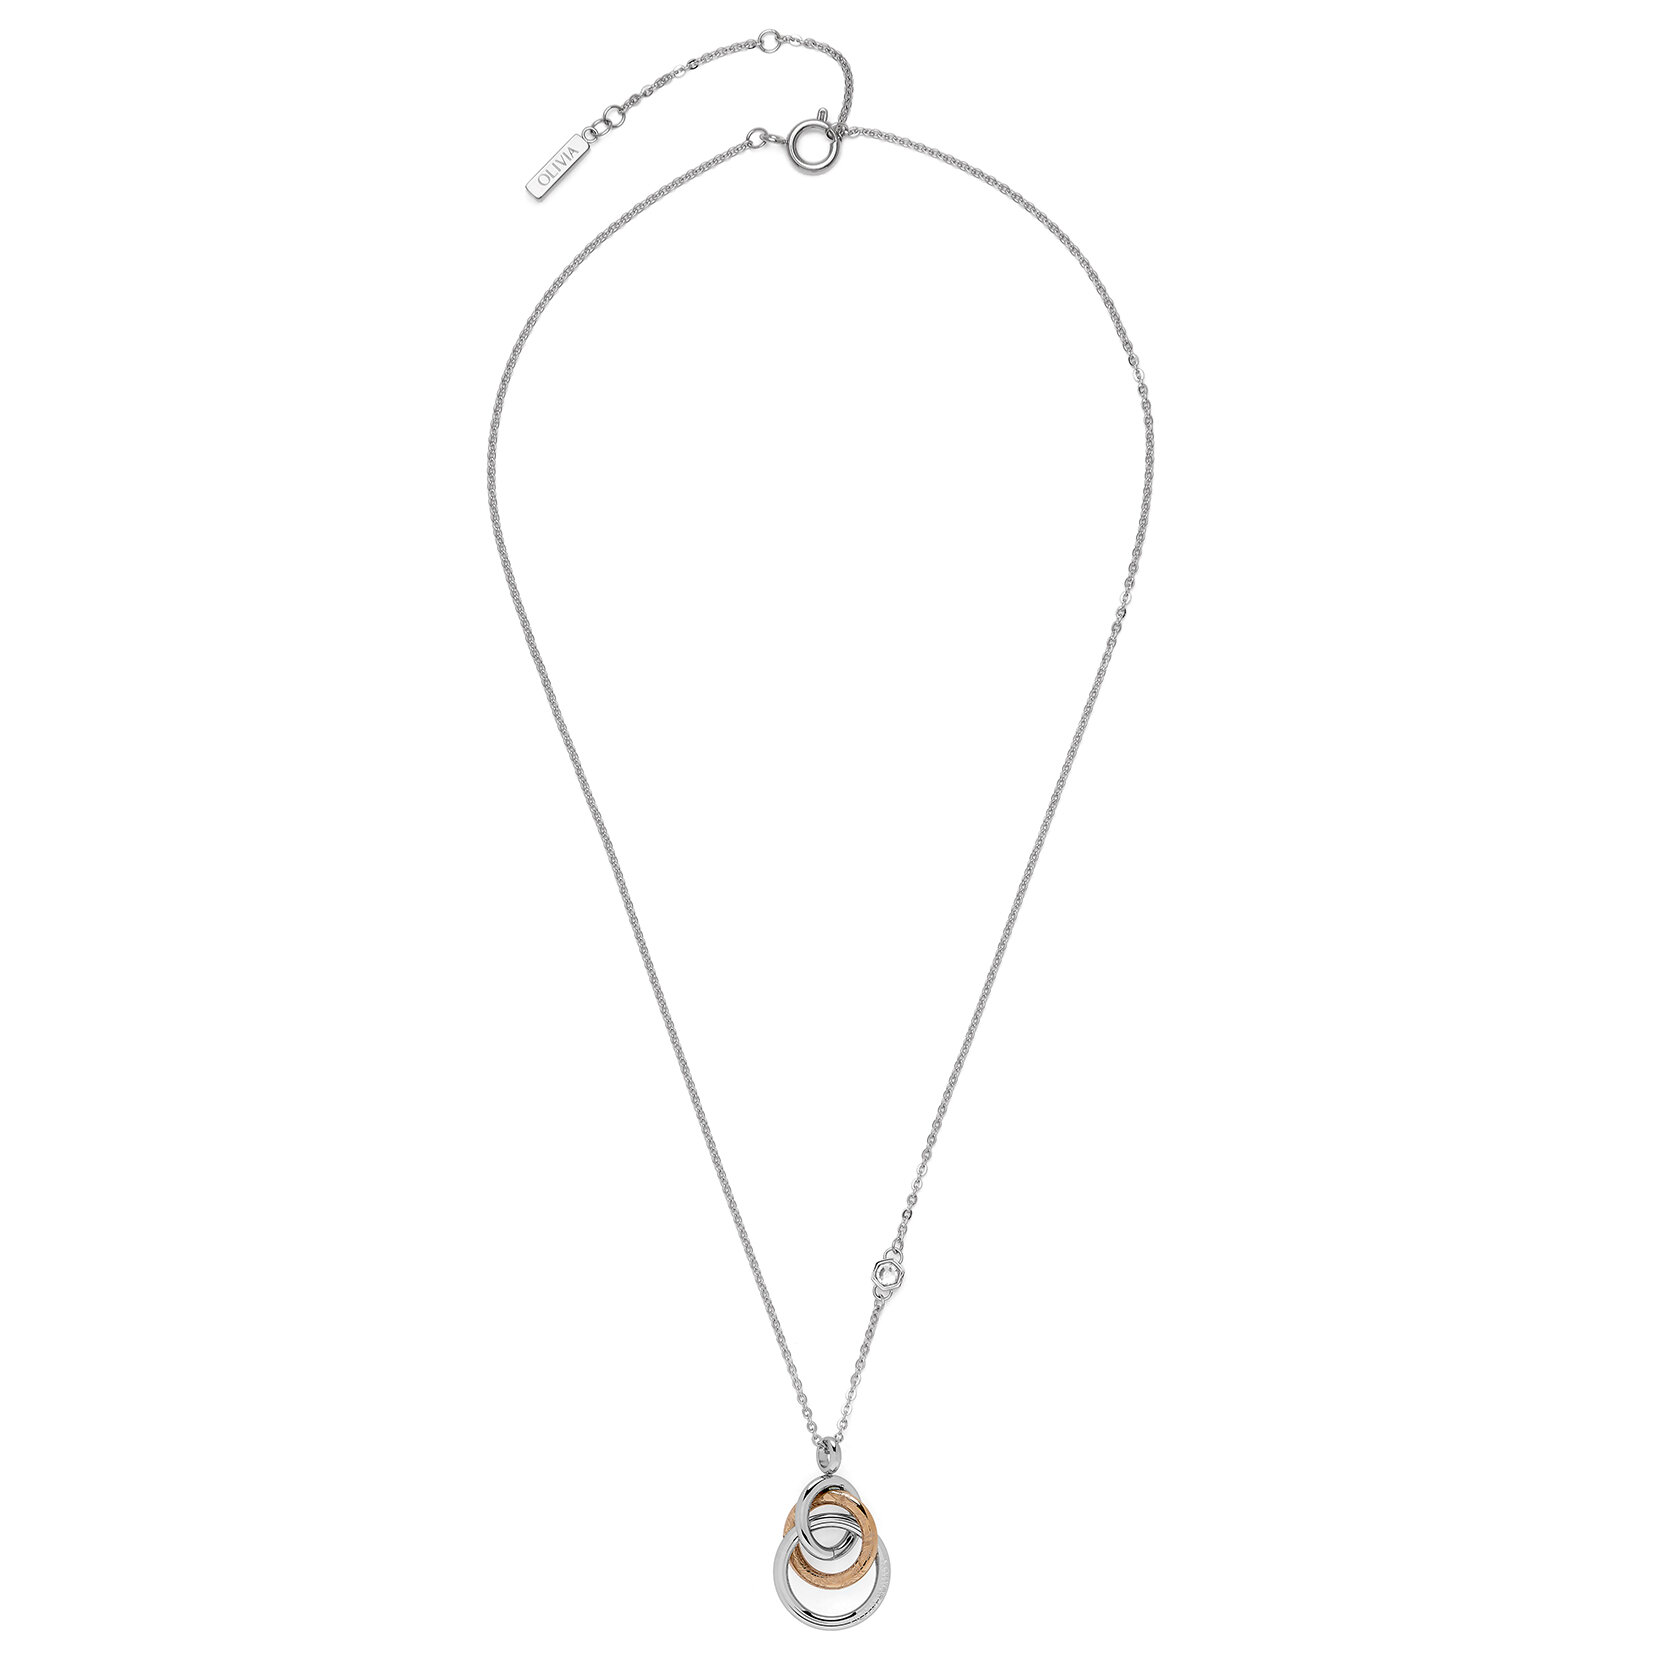 Encircle Silver & Rose Gold Plated Pendant Necklace